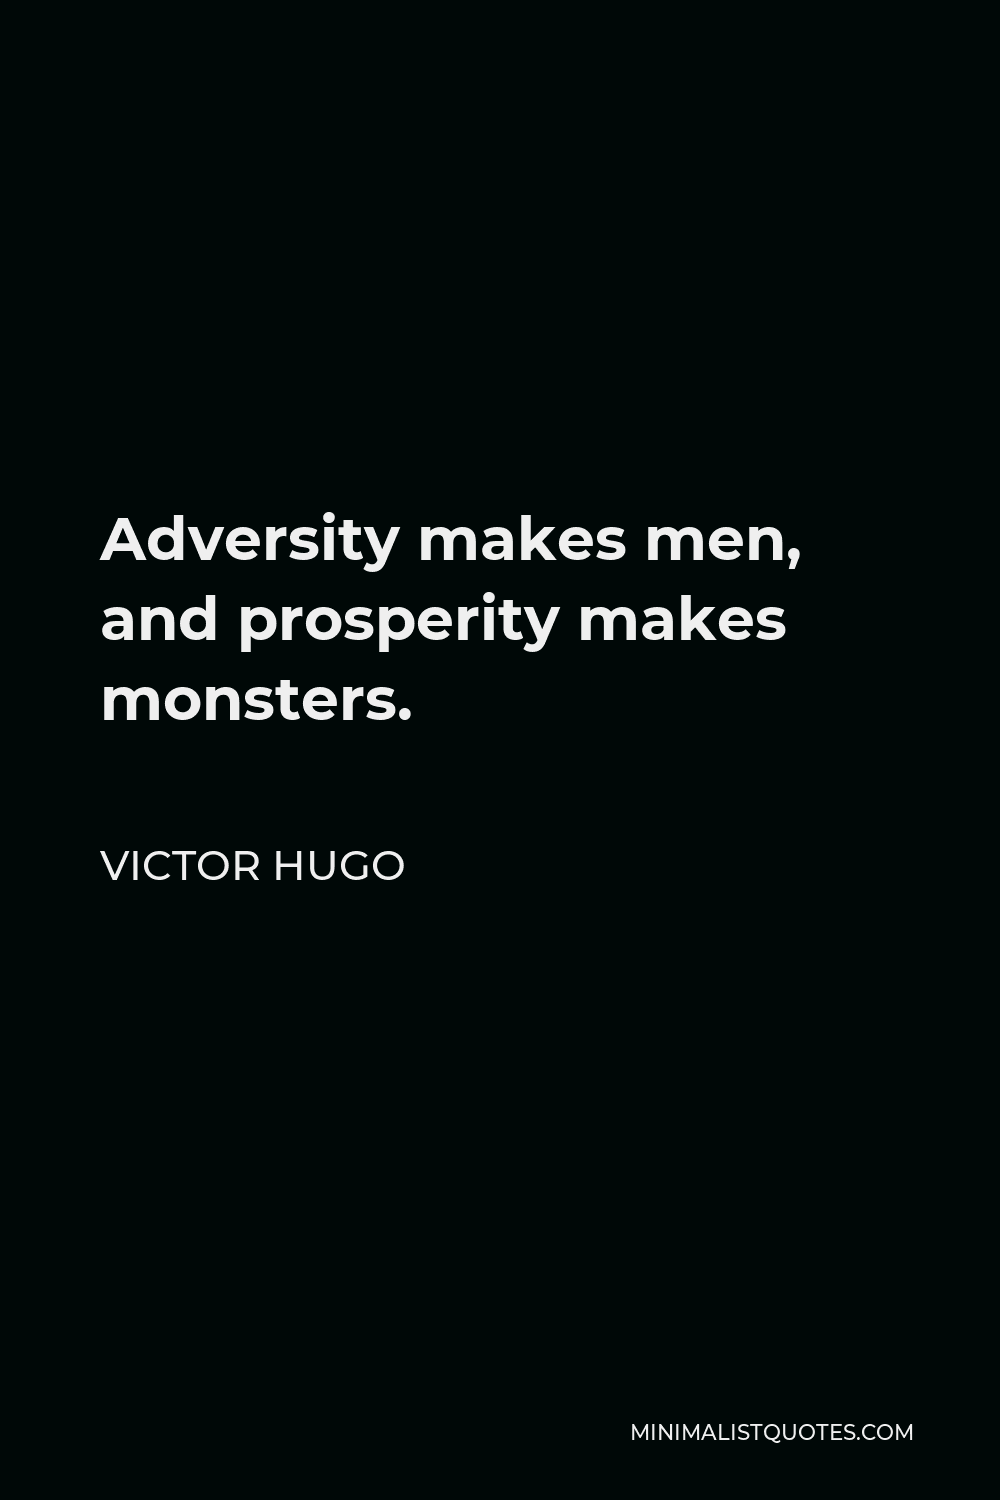 Victor Hugo Quote - Adversity makes men, and prosperity makes monsters.